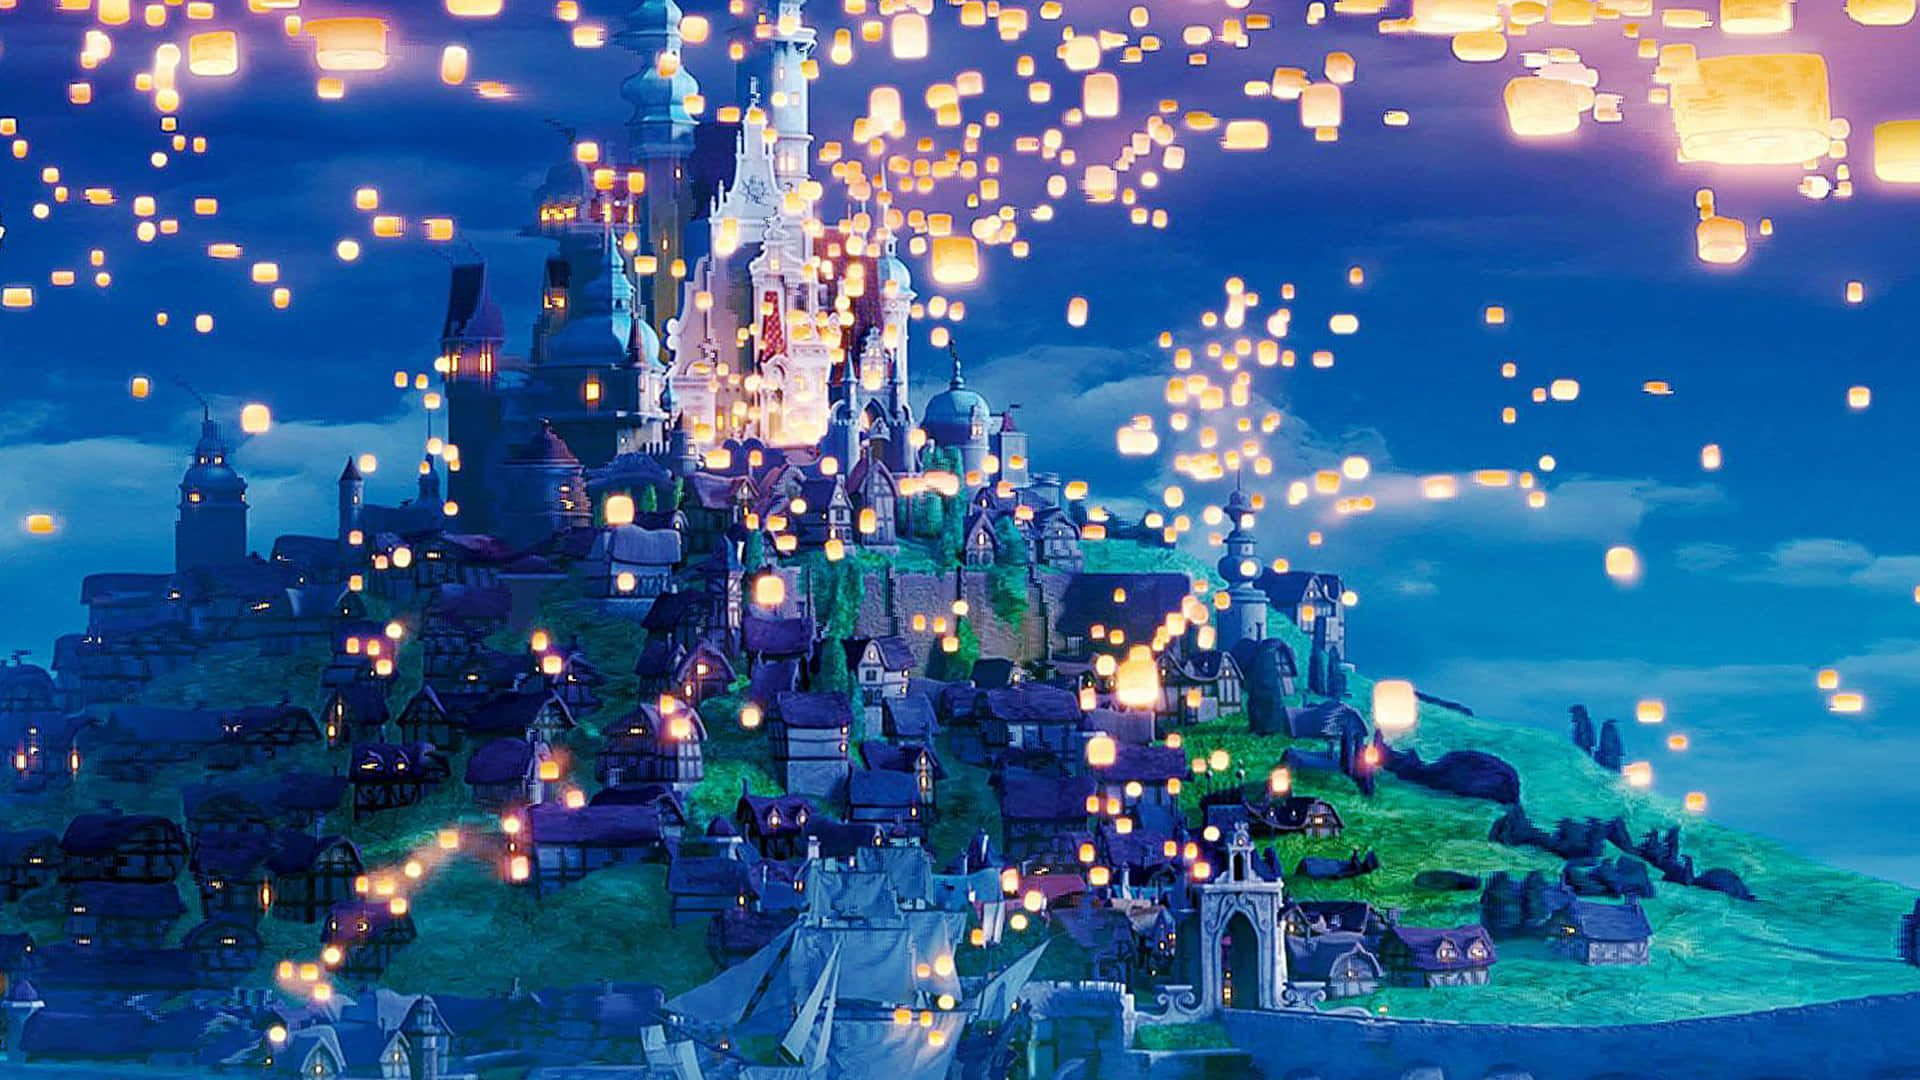 Rapunzel admiring the enchanting lanterns from her tower